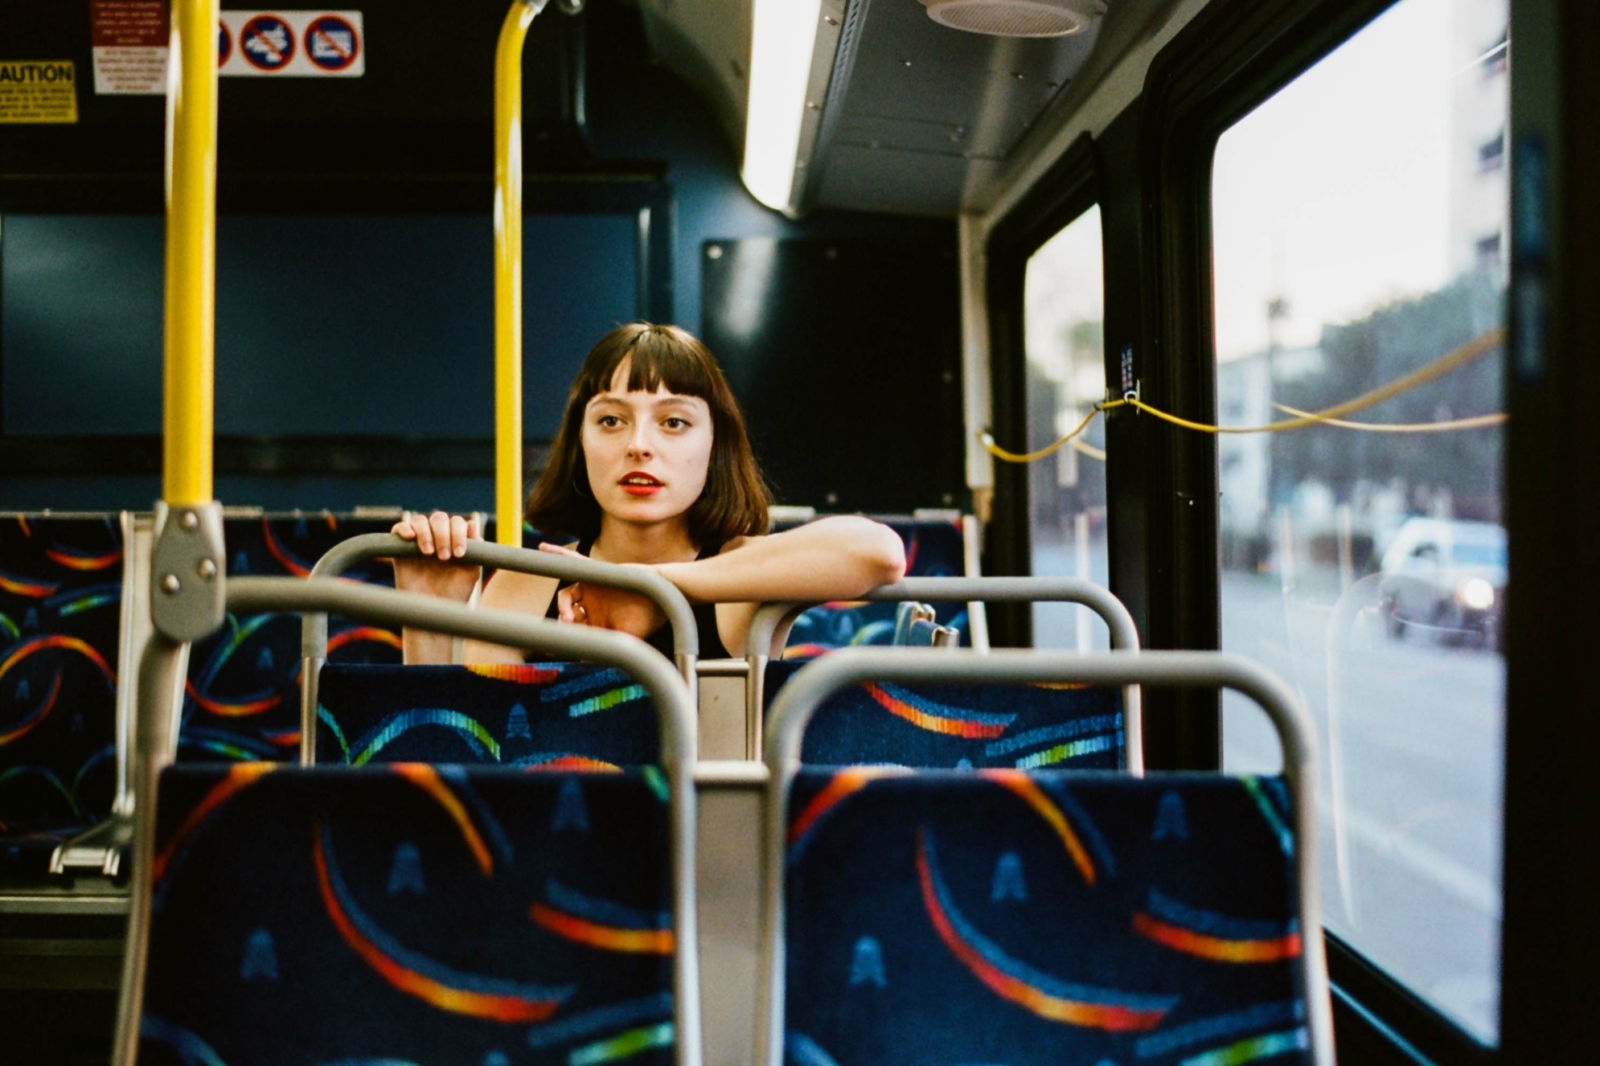 Stella Donnelly talks us through her debut album, track by track